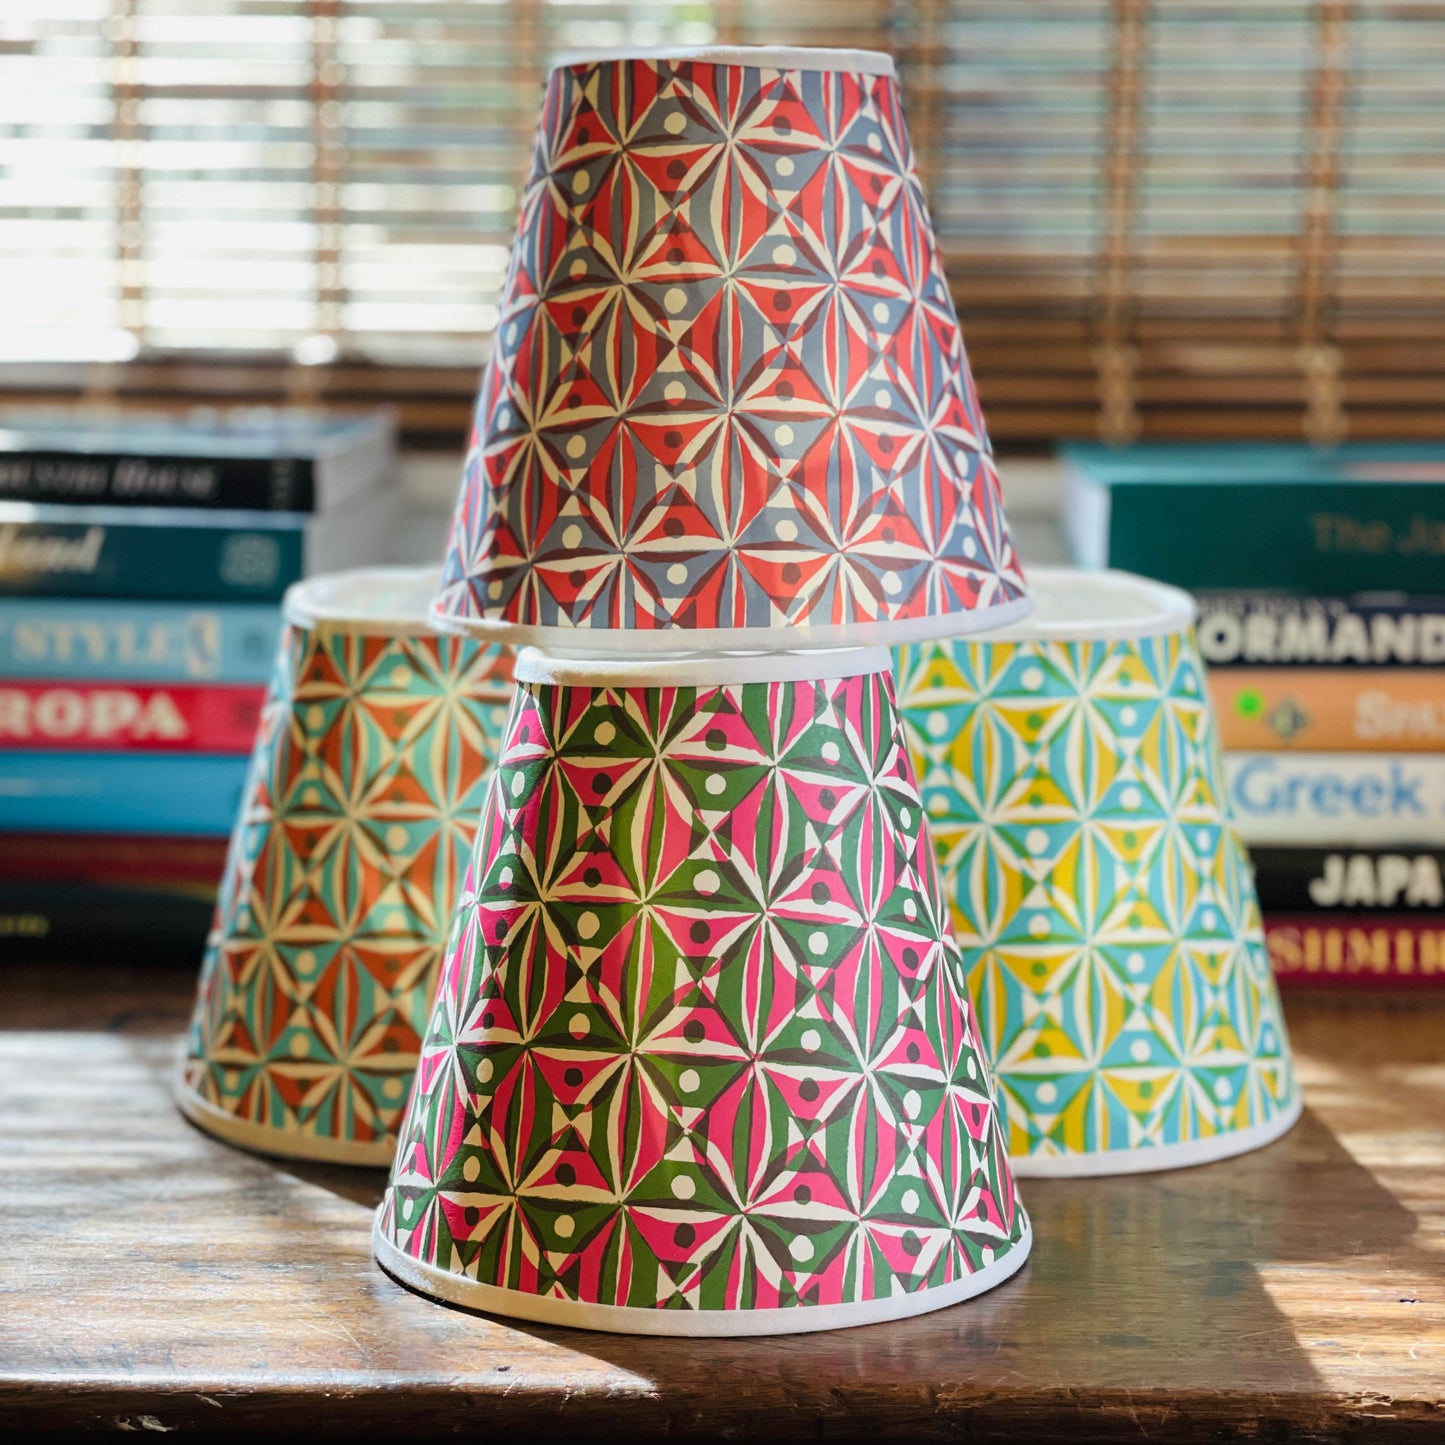 Small Clip-On Lampshade. Patterned Paper from England. "Kaleidoscope" Pink and Green. White Trim.